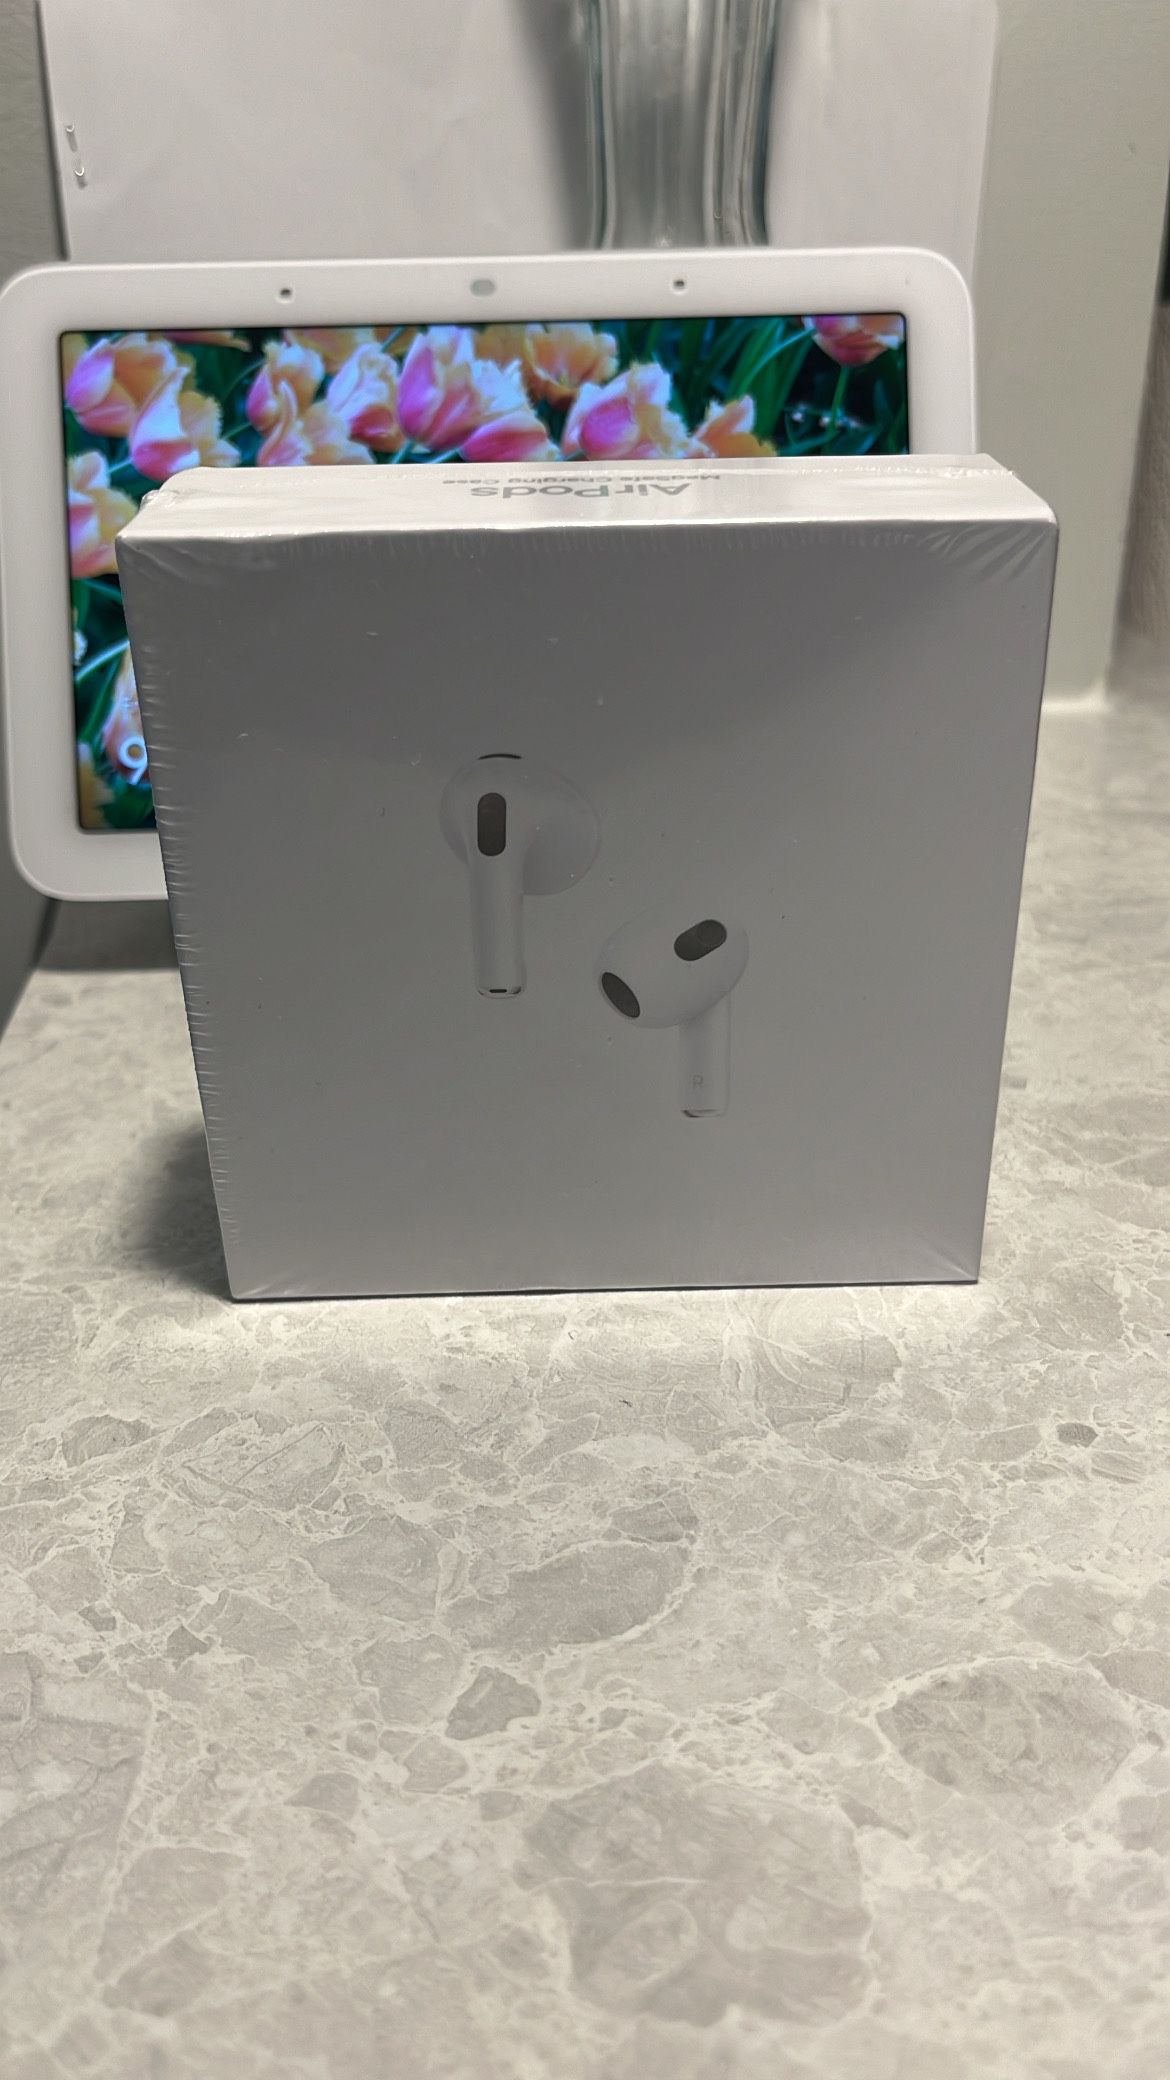 Air-Pods Pro 2